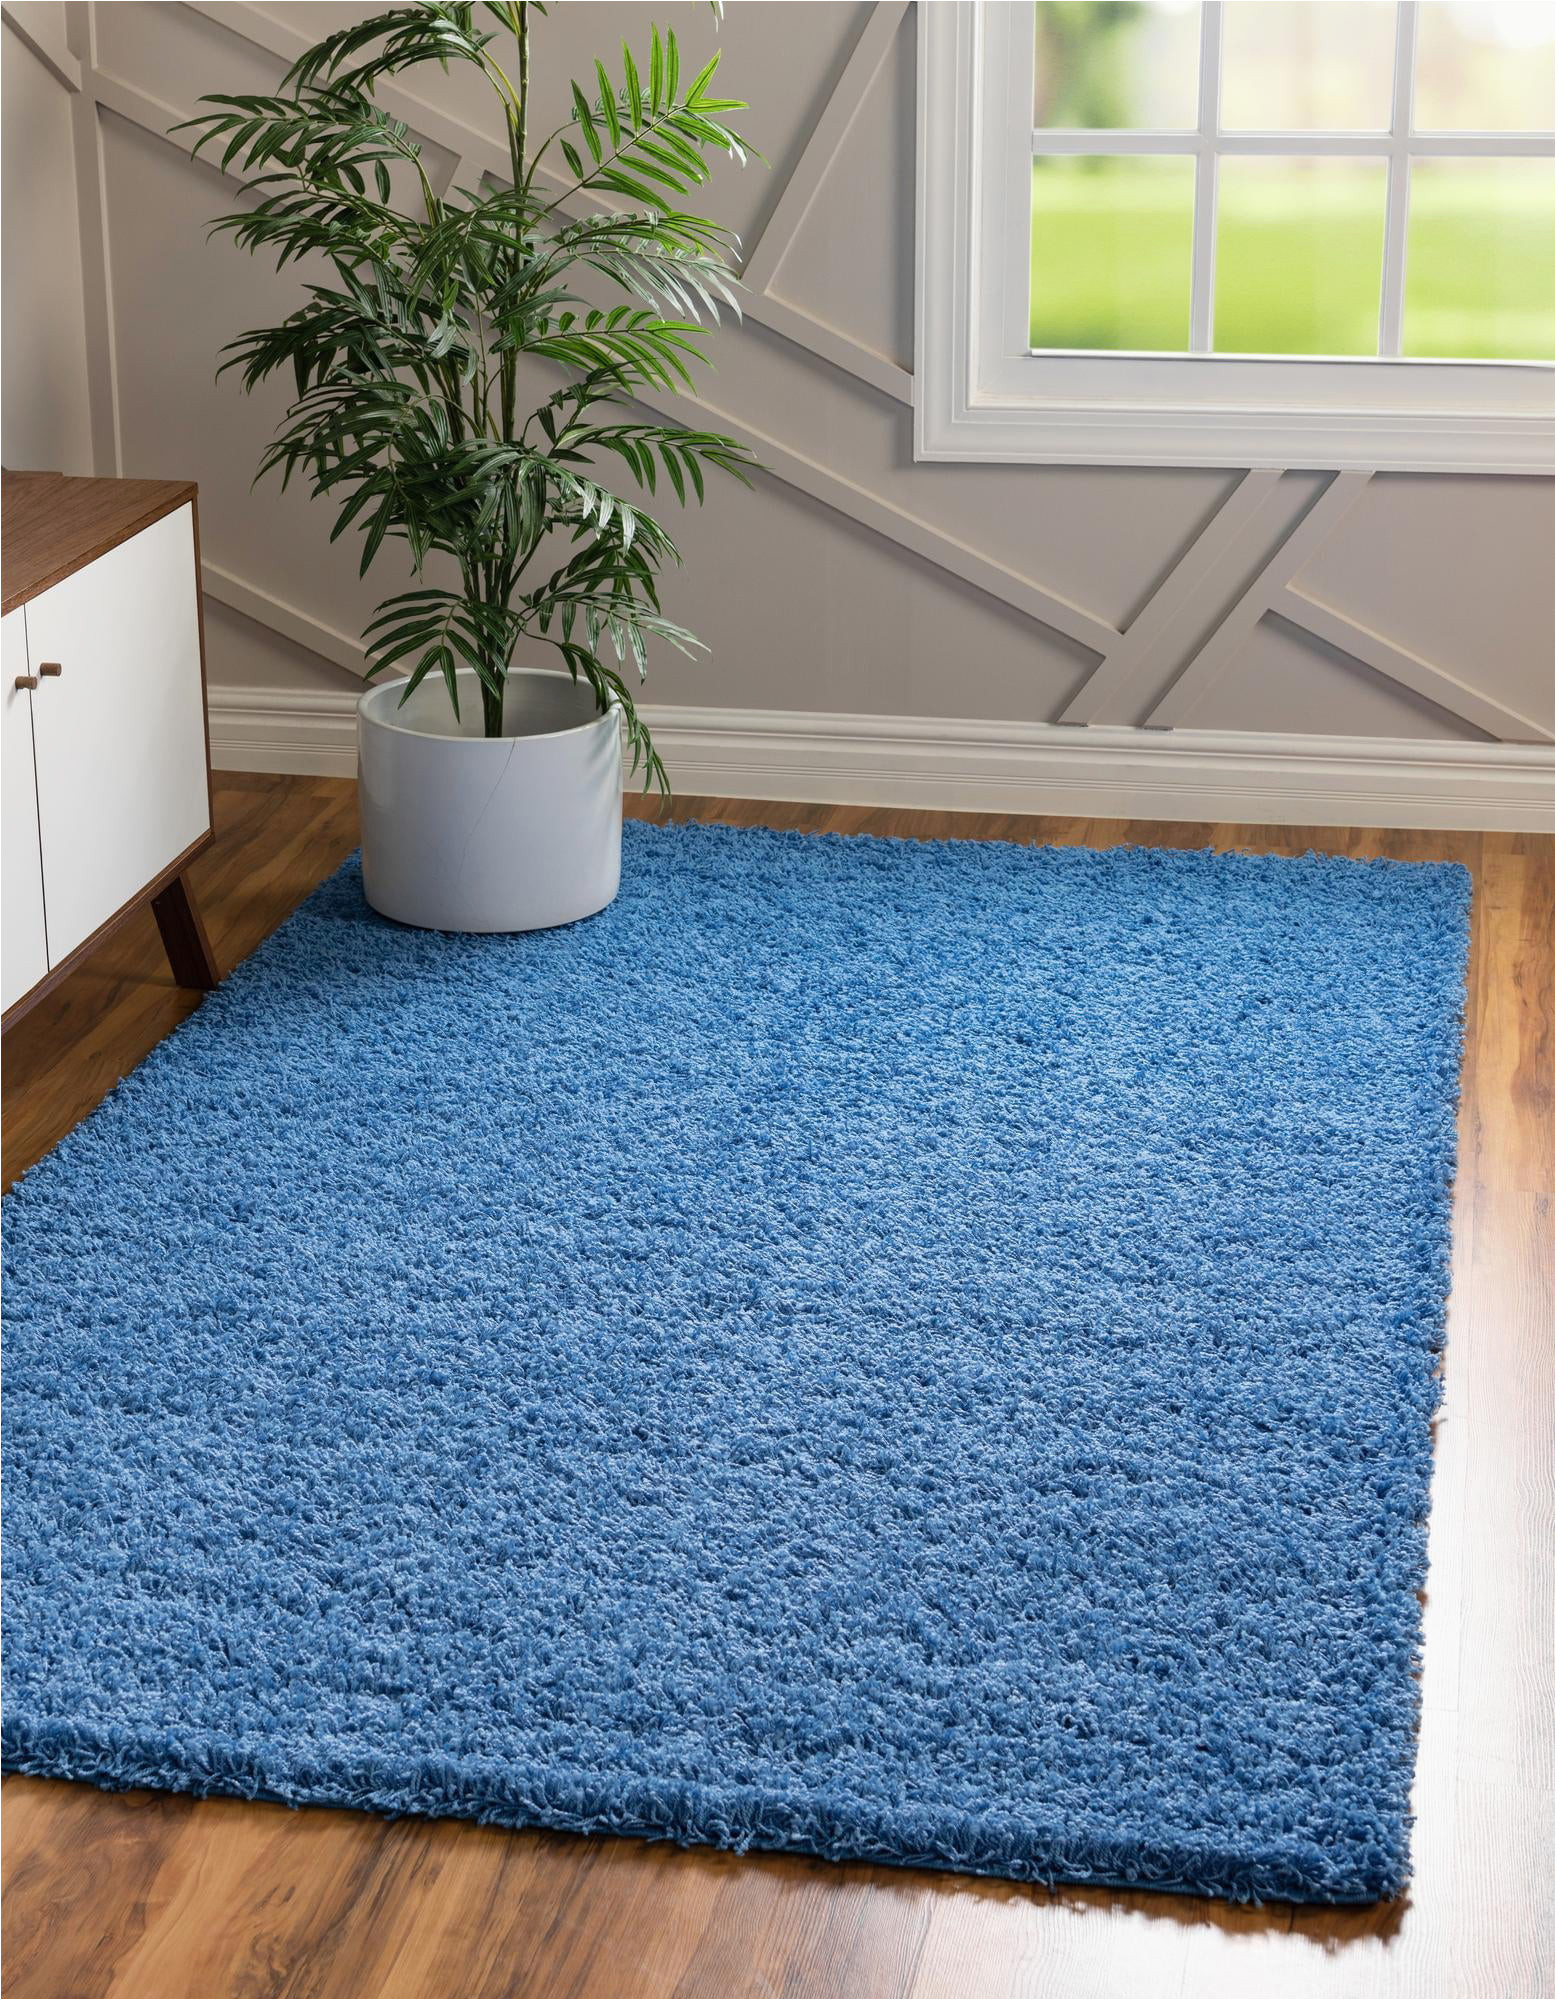 Solid Blue Rug 8×10 Rugs.com solid Shag Collection Rug â 8′ X 10′ Periwinkle Blue Shag Rug Perfect for Living Rooms, Large Dining Rooms, Open Floorplans